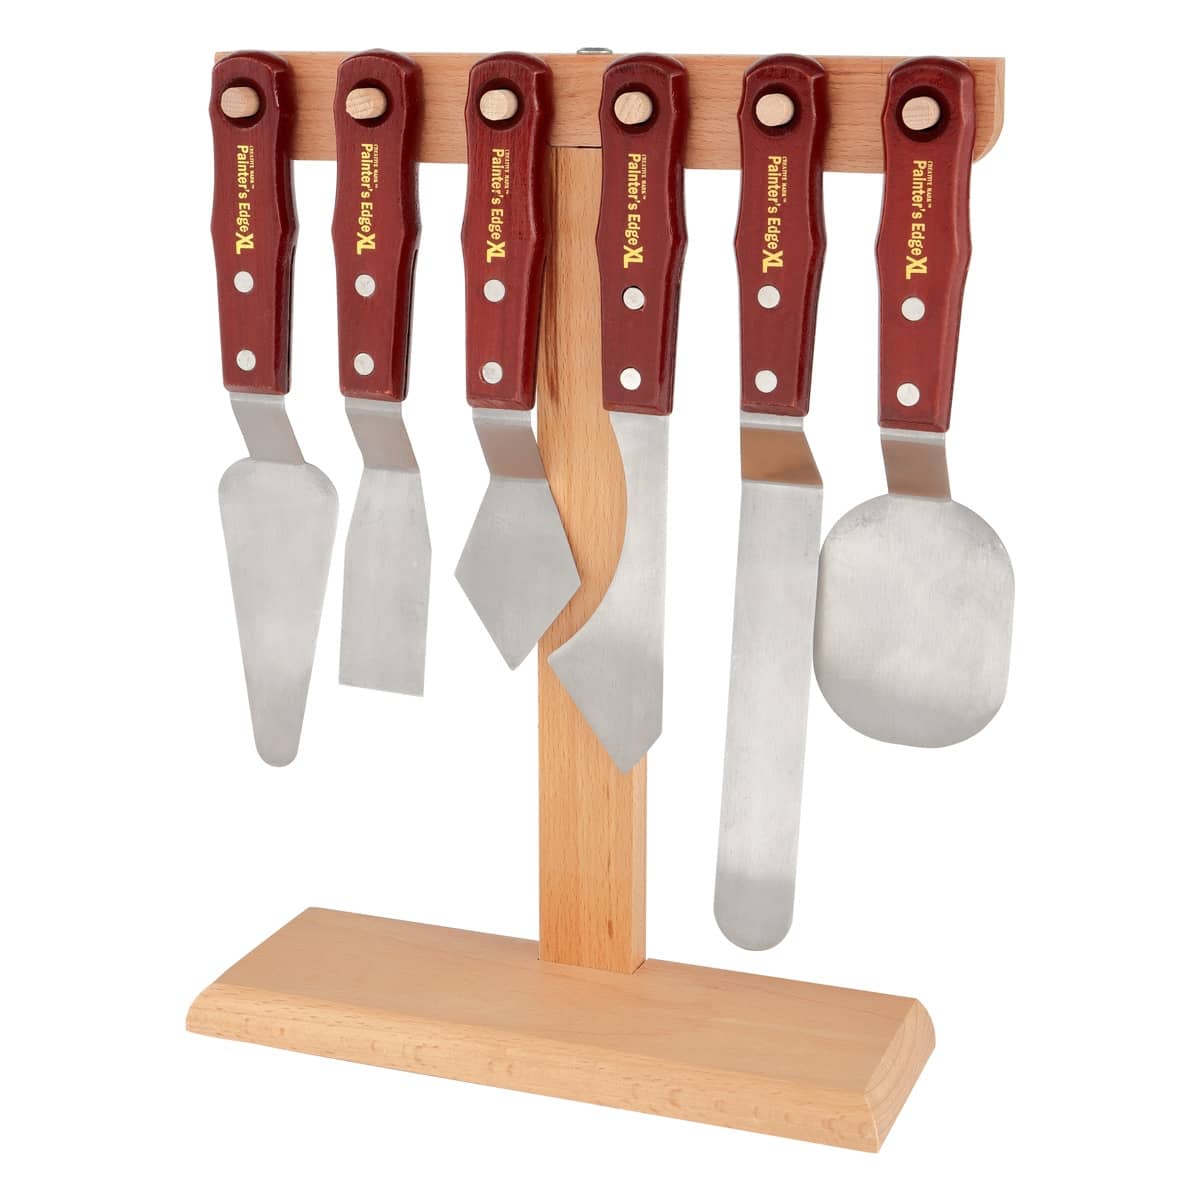 Painter's Edge XL Steel Palette Knives Set of 6 & Stand